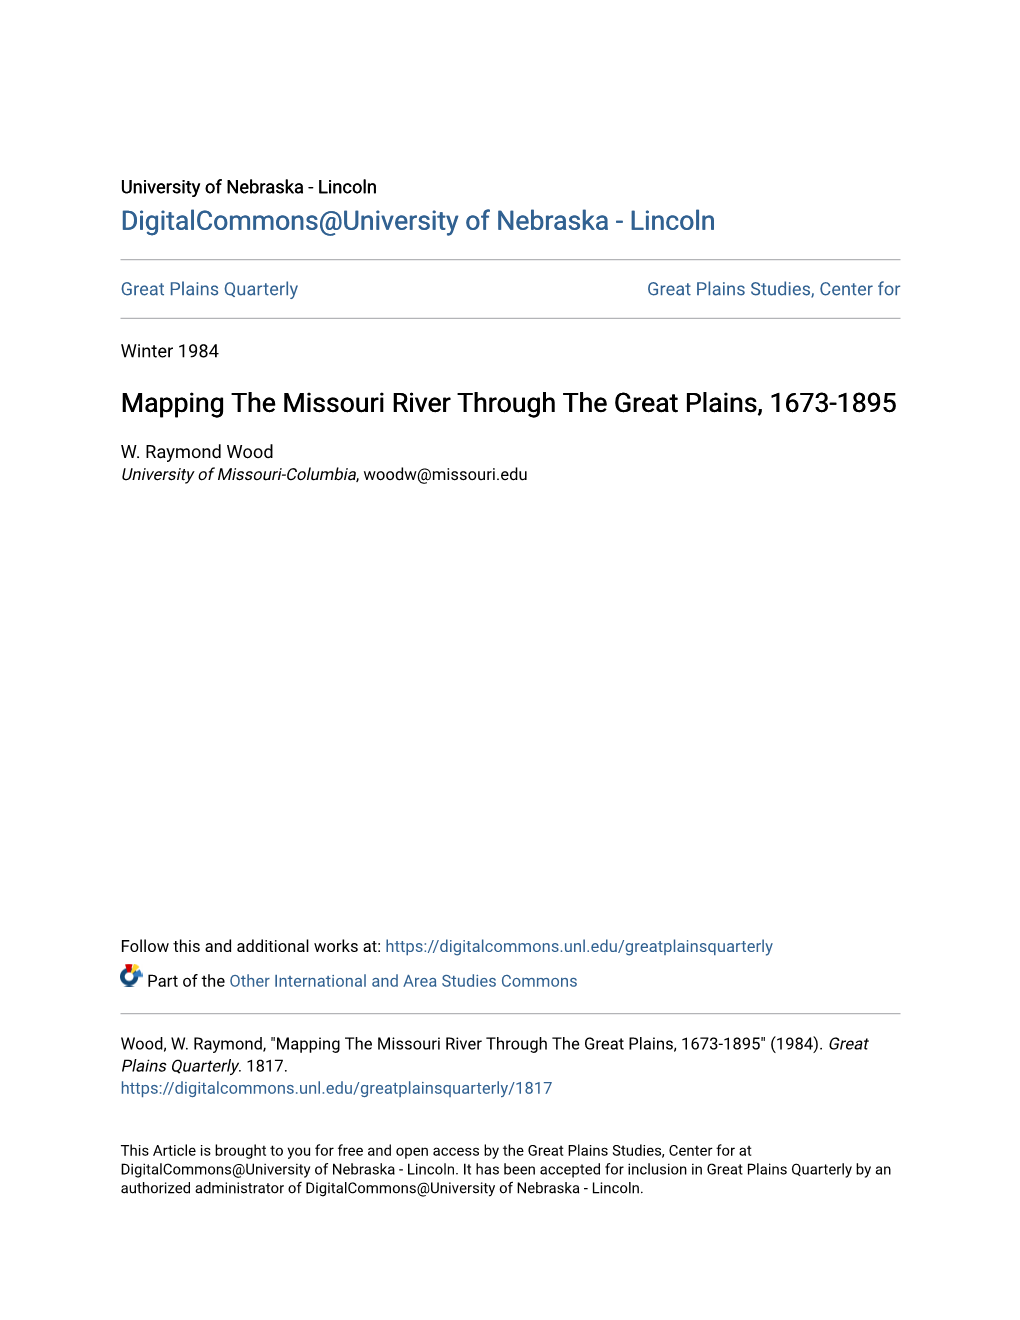 Mapping the Missouri River Through the Great Plains, 1673-1895